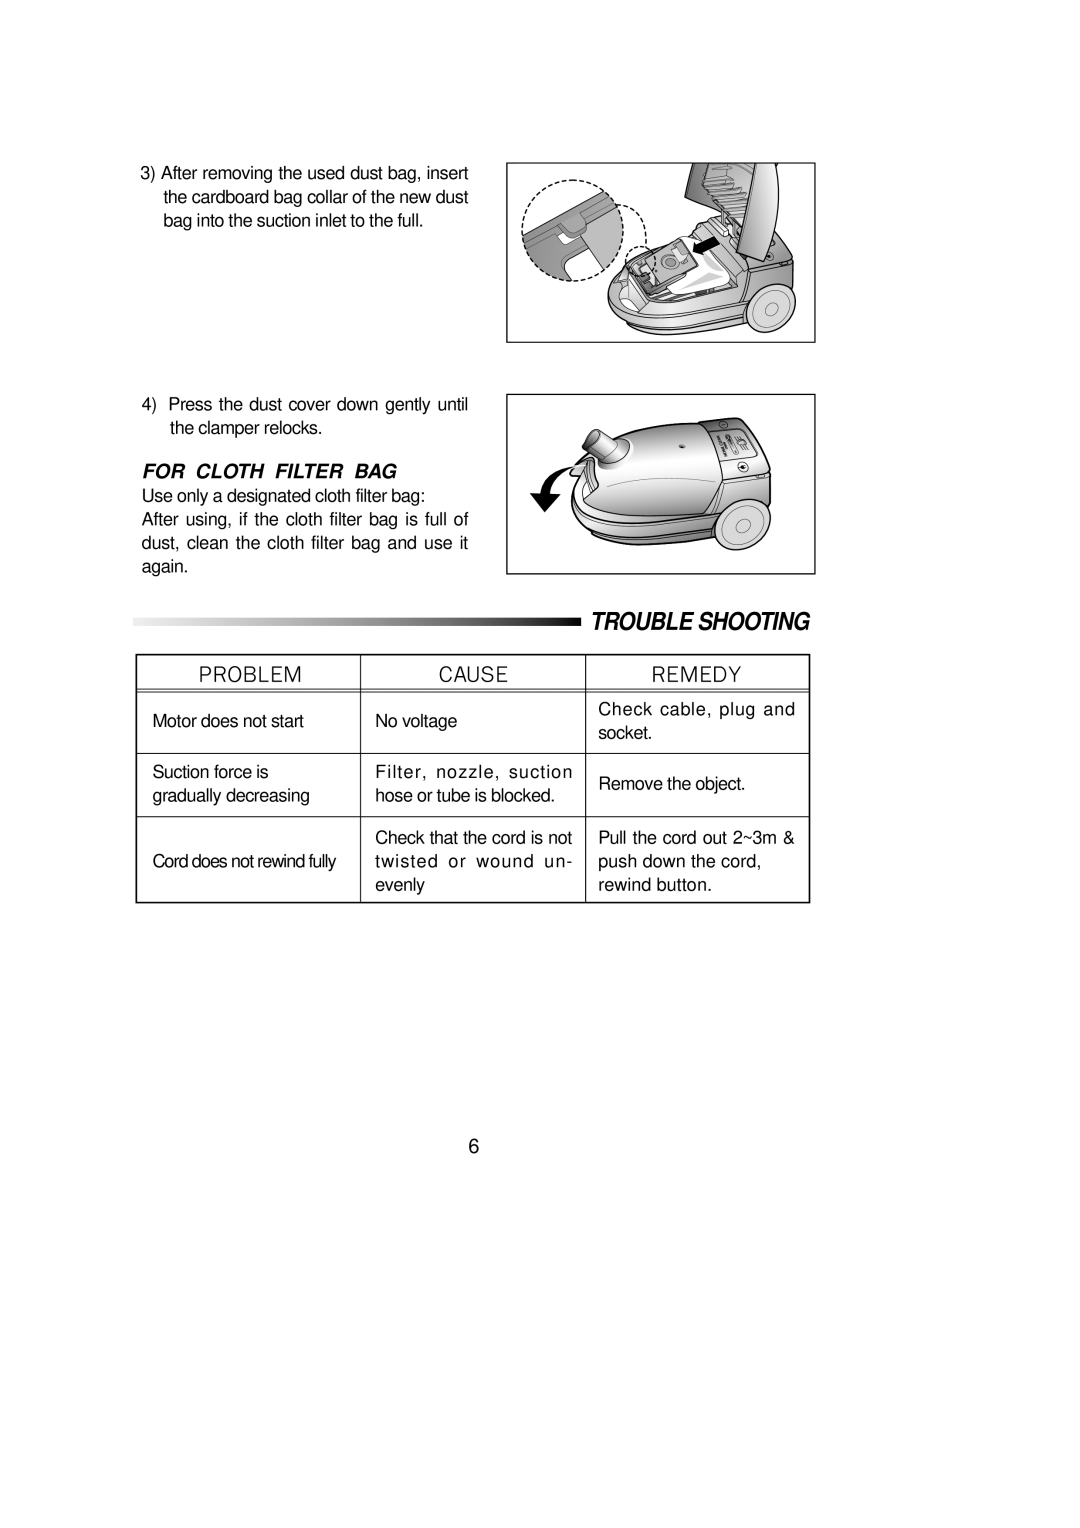 Samsung RC-5513V manual For Cloth Filter Bag, Trouble Shooting, Problem, Cause, Remedy 